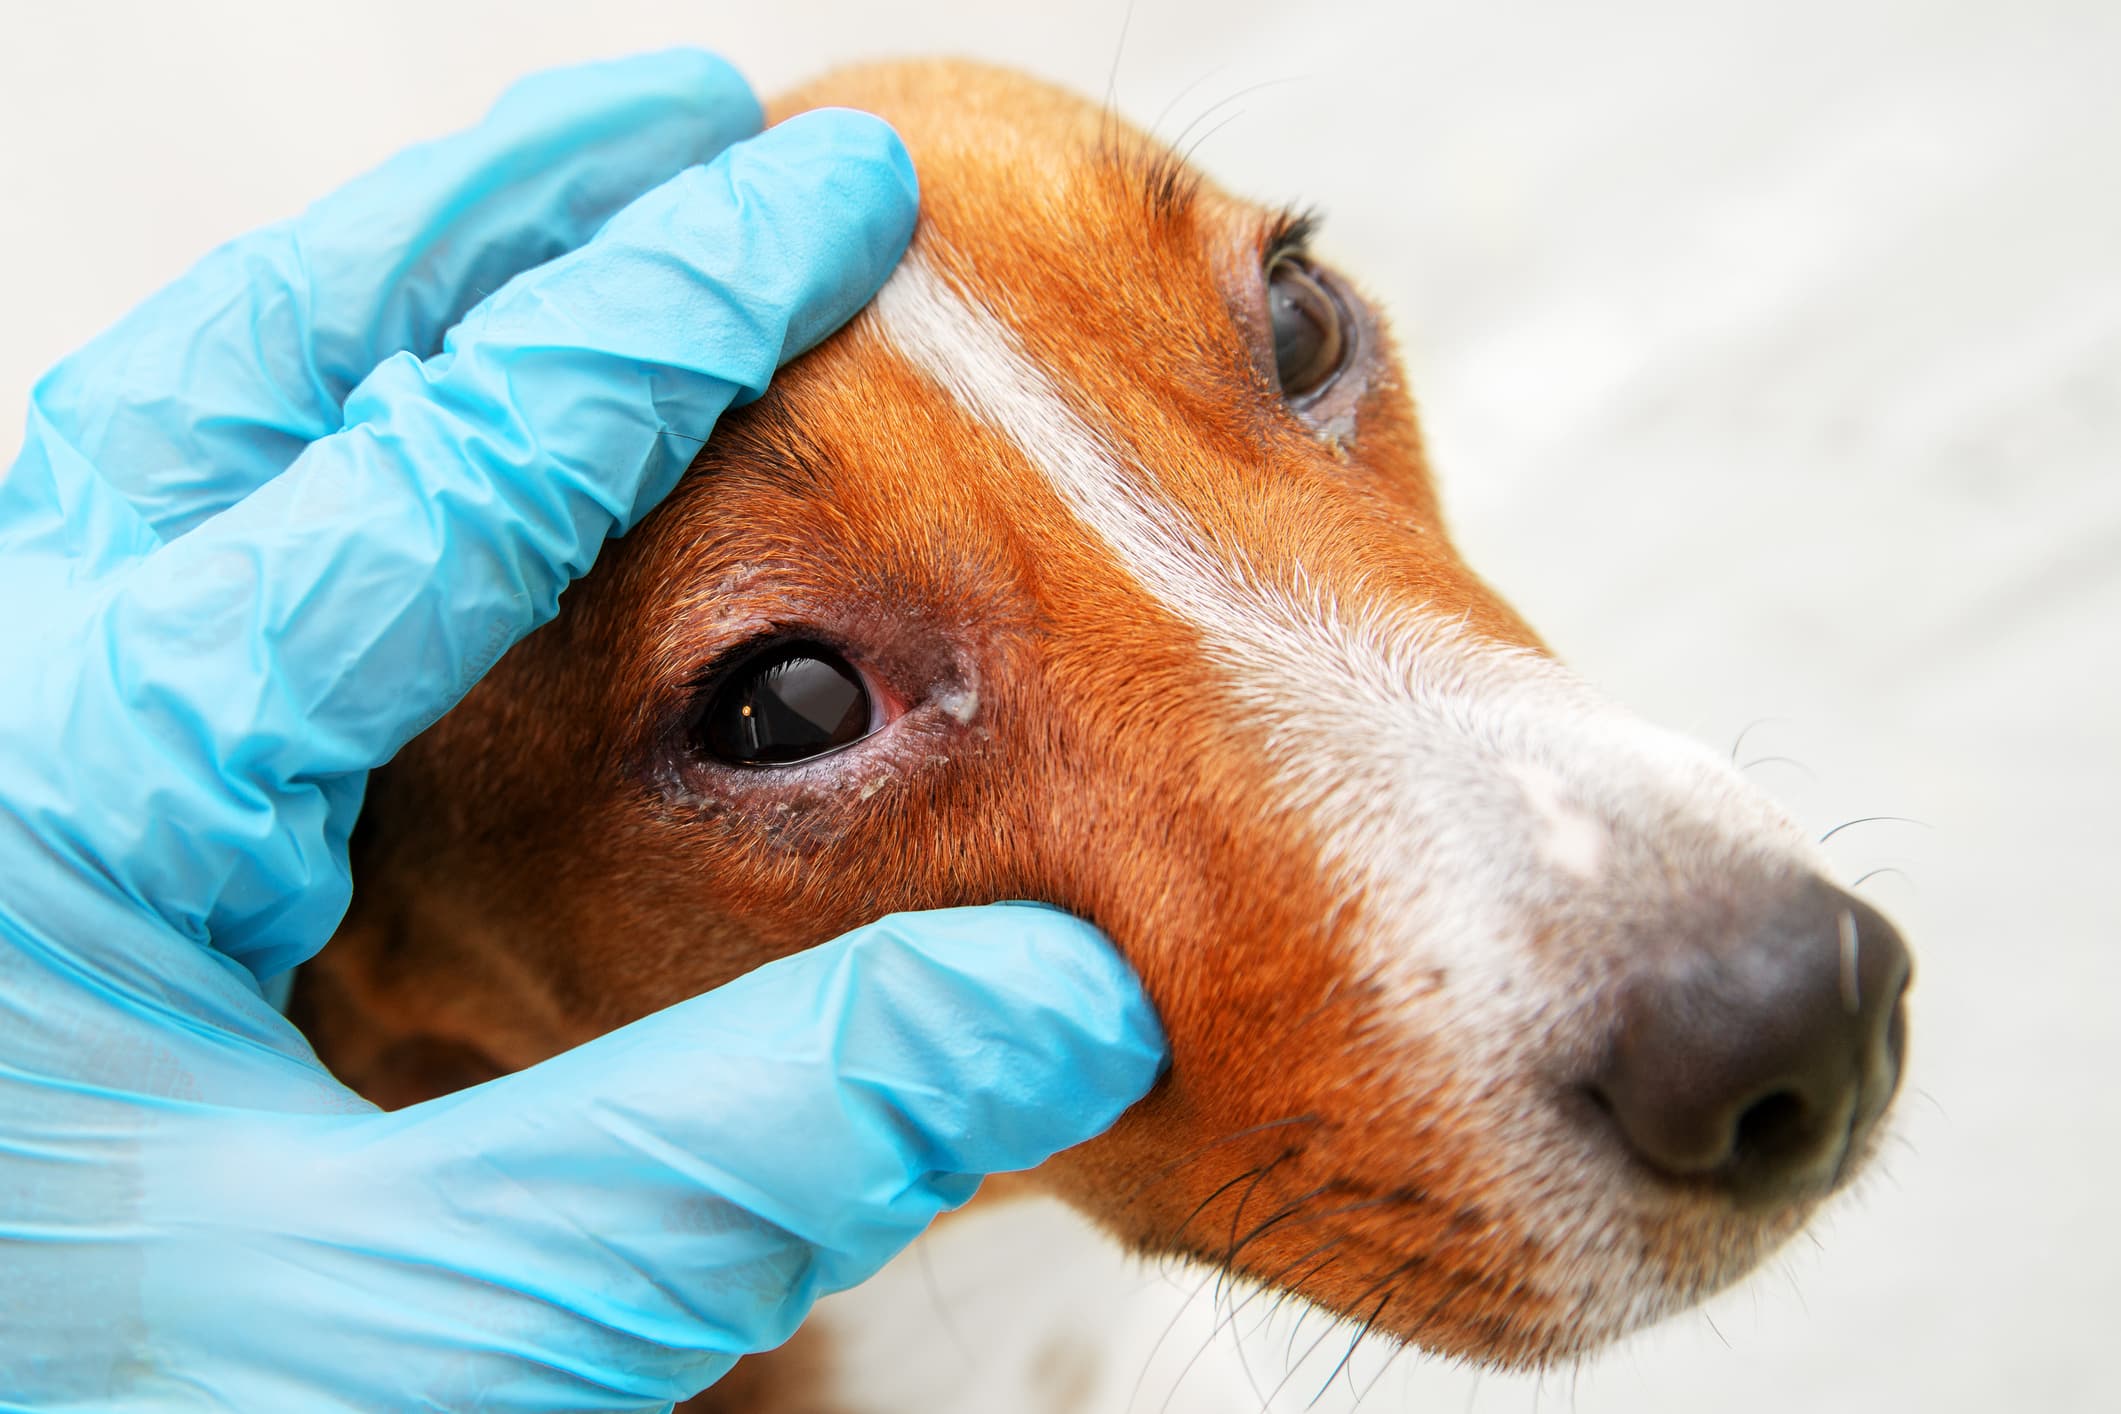 Veterinarian check on the eyes of a dog dachshund. conjunctivitis eyes of dog. Medical and Health care of pet concept.